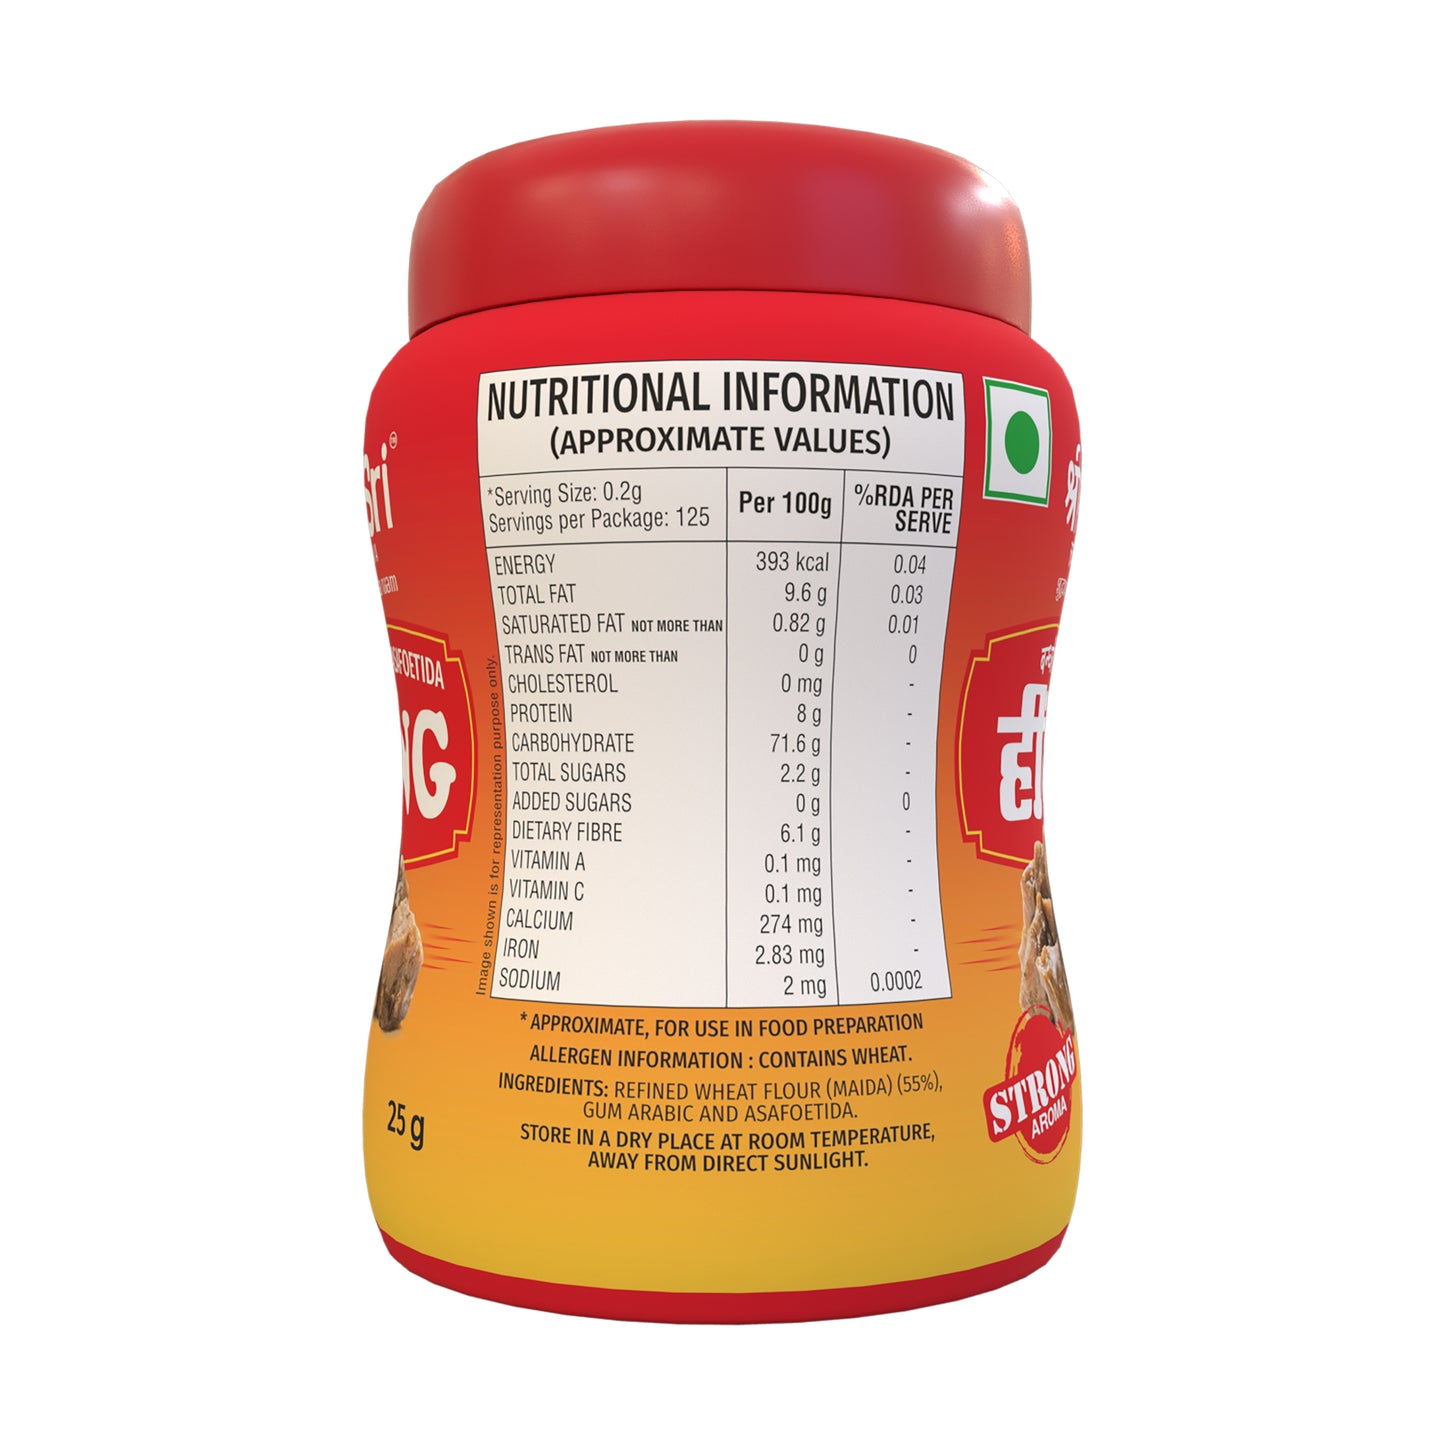 Compounded Asafoetida Hing, 25 g